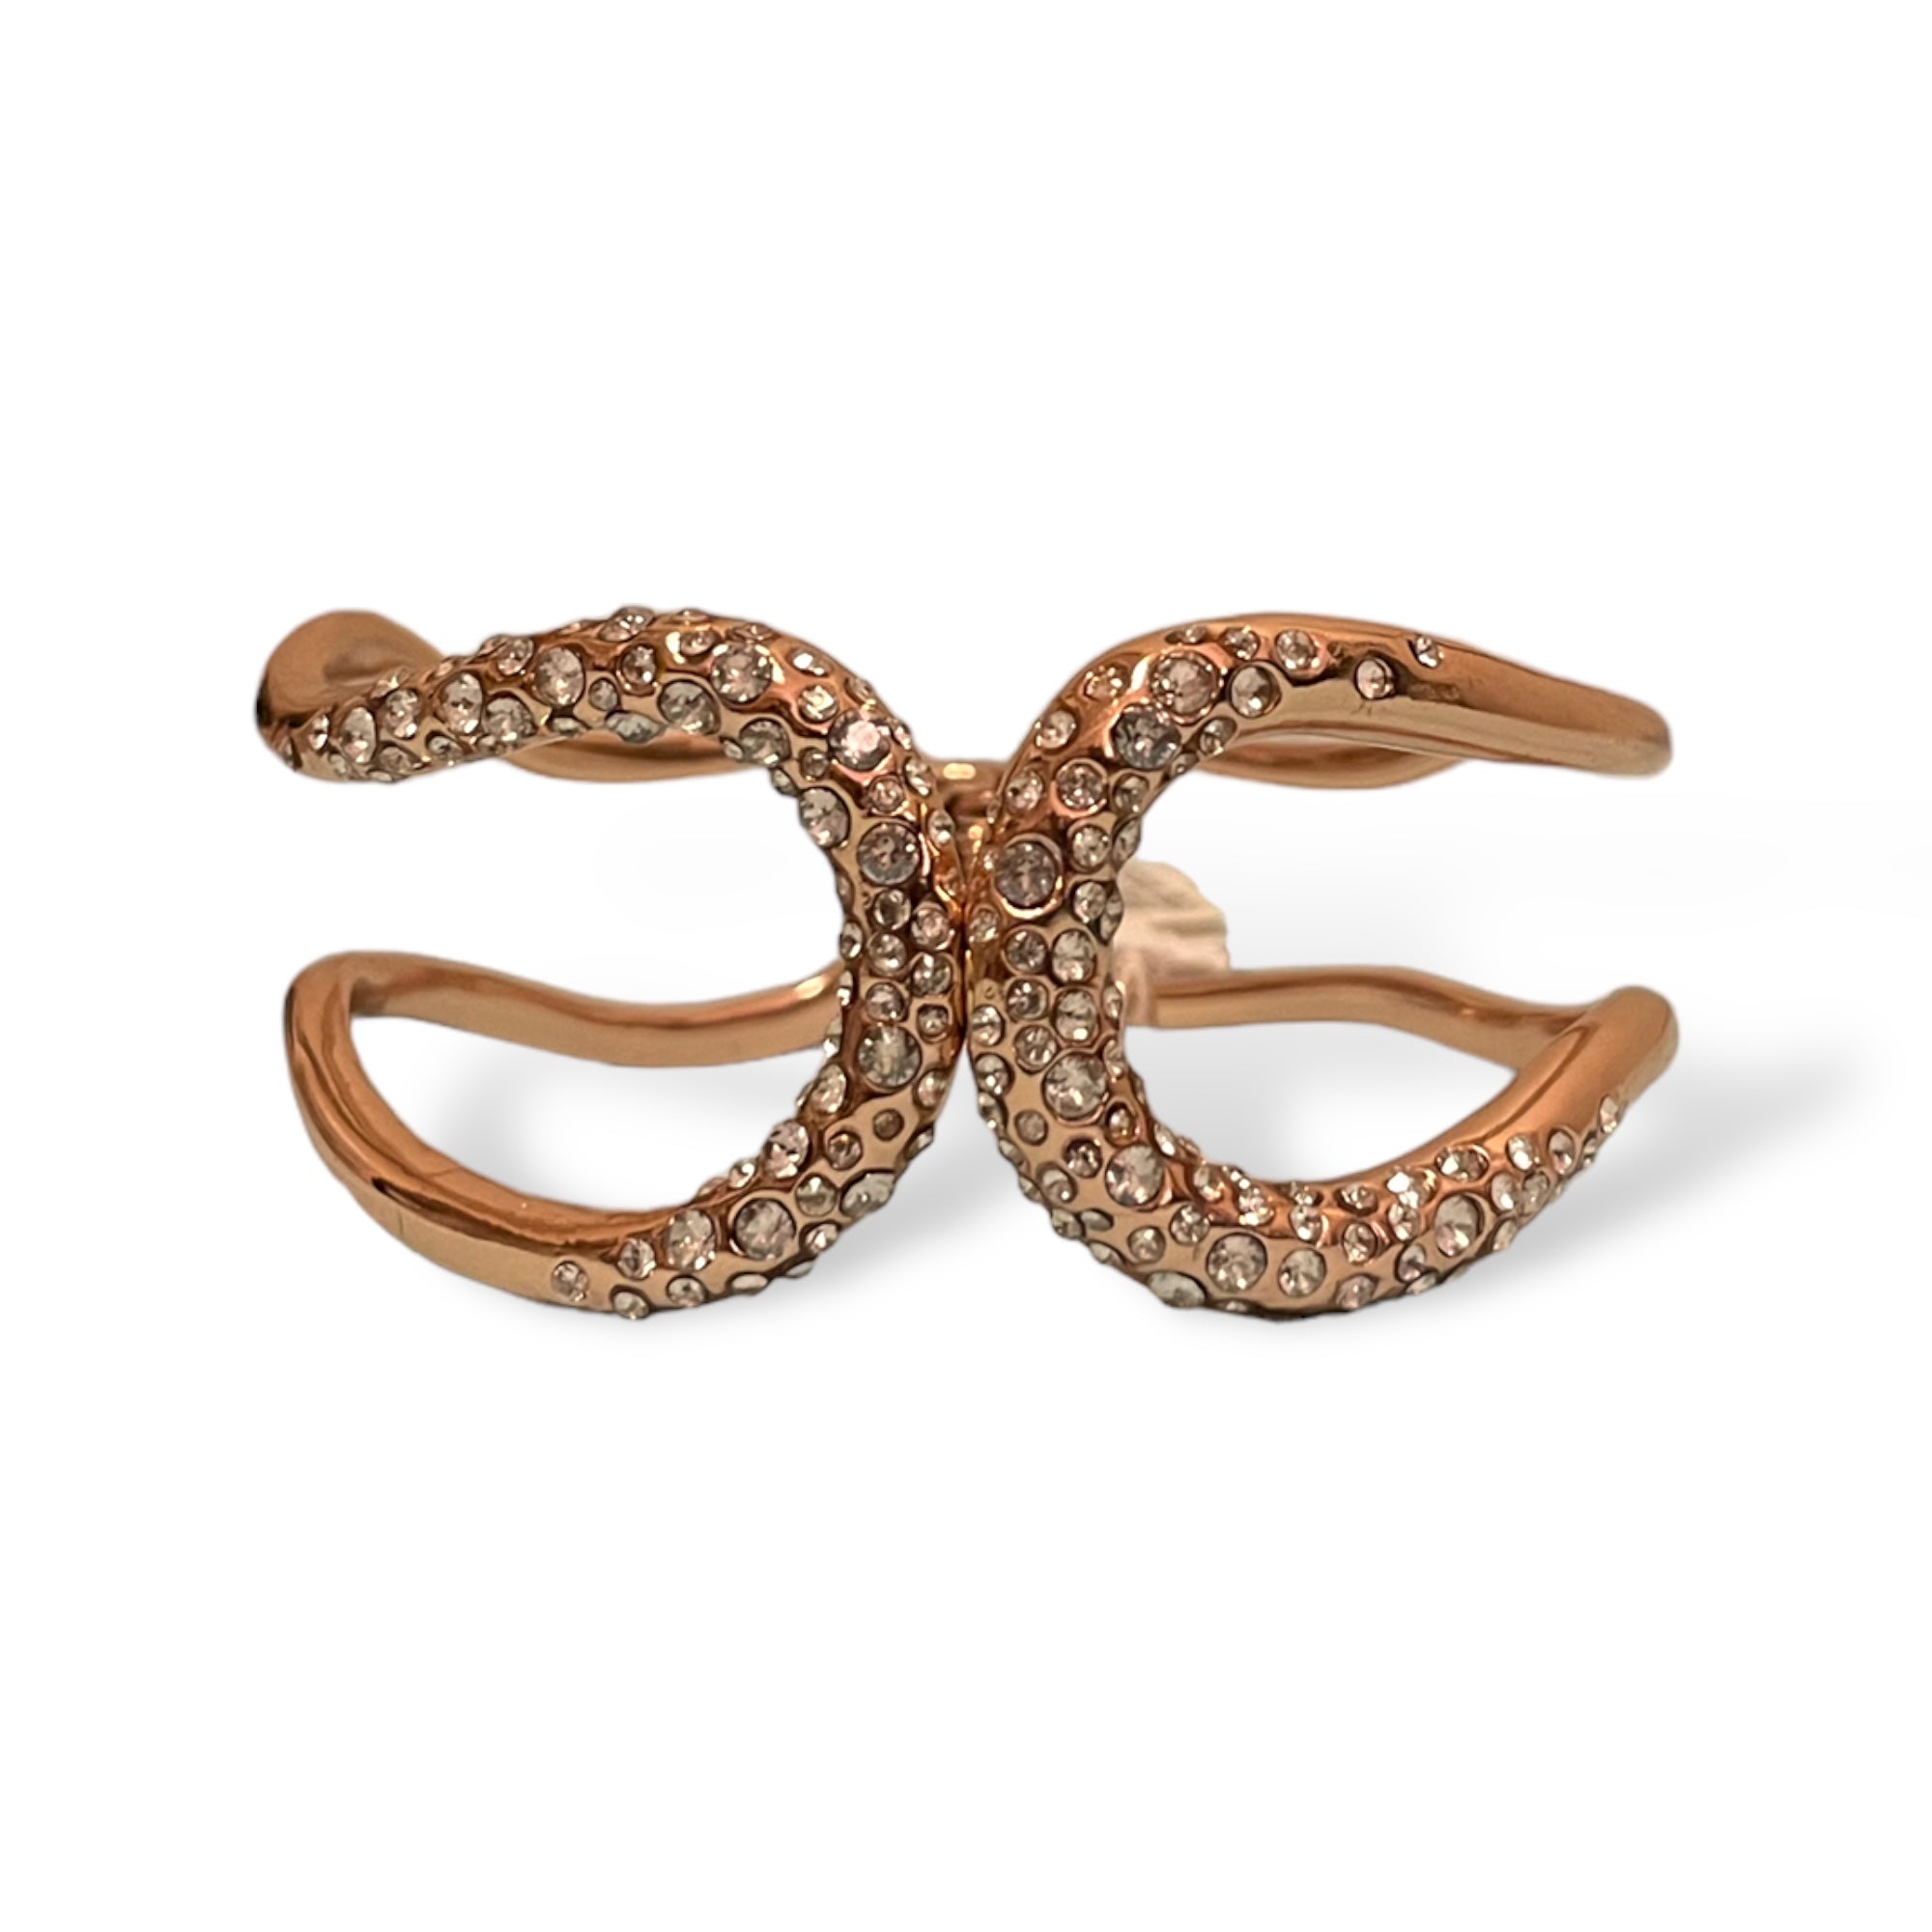 ALEXIS BITTAR Crystal Encrusted 18k Rose Gold Plated Cuff